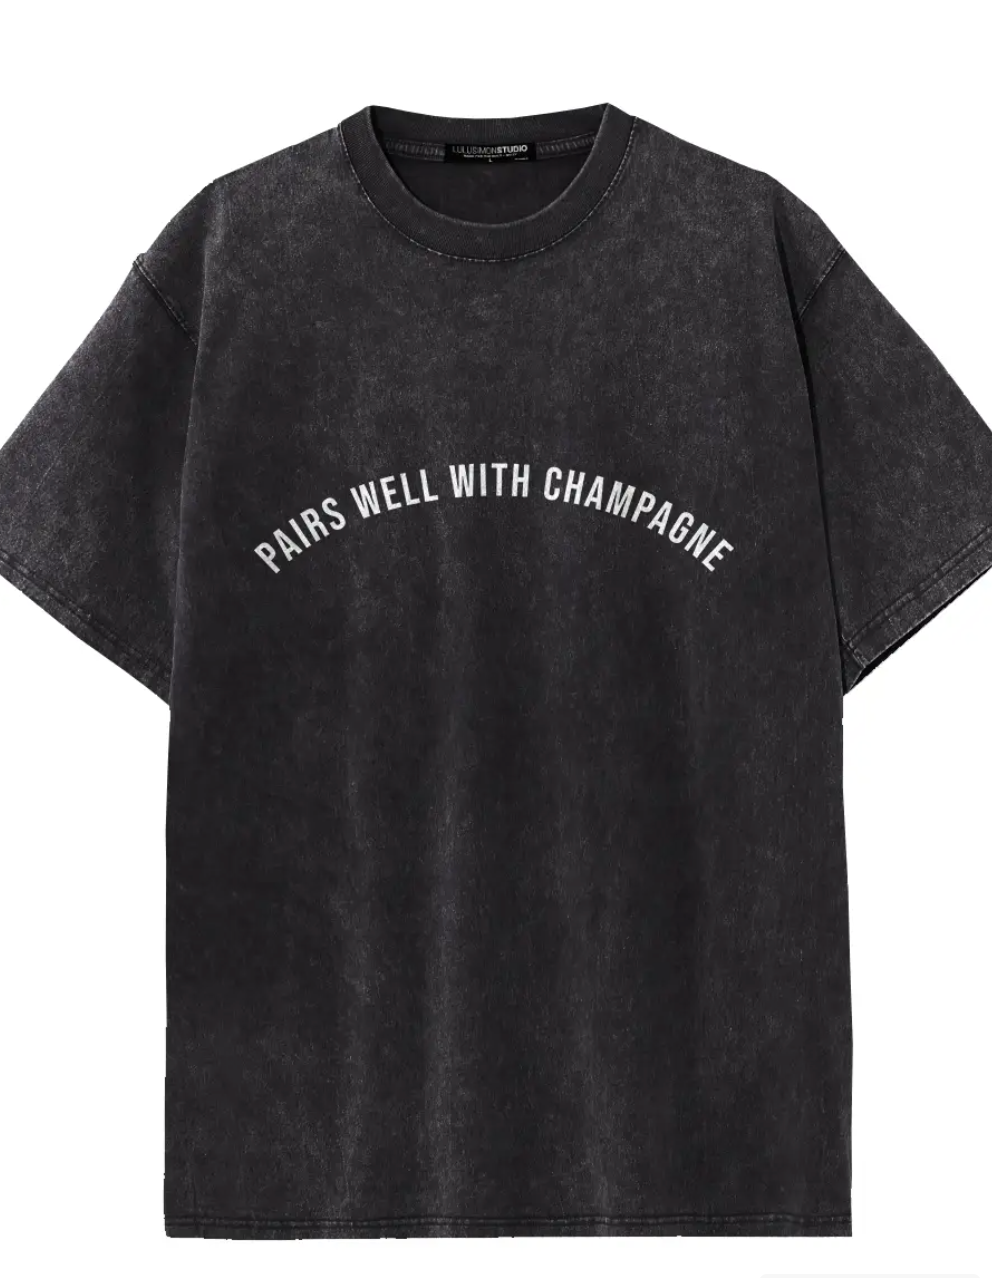 Pairs Well With Champagne ® Vintage Wash Tee